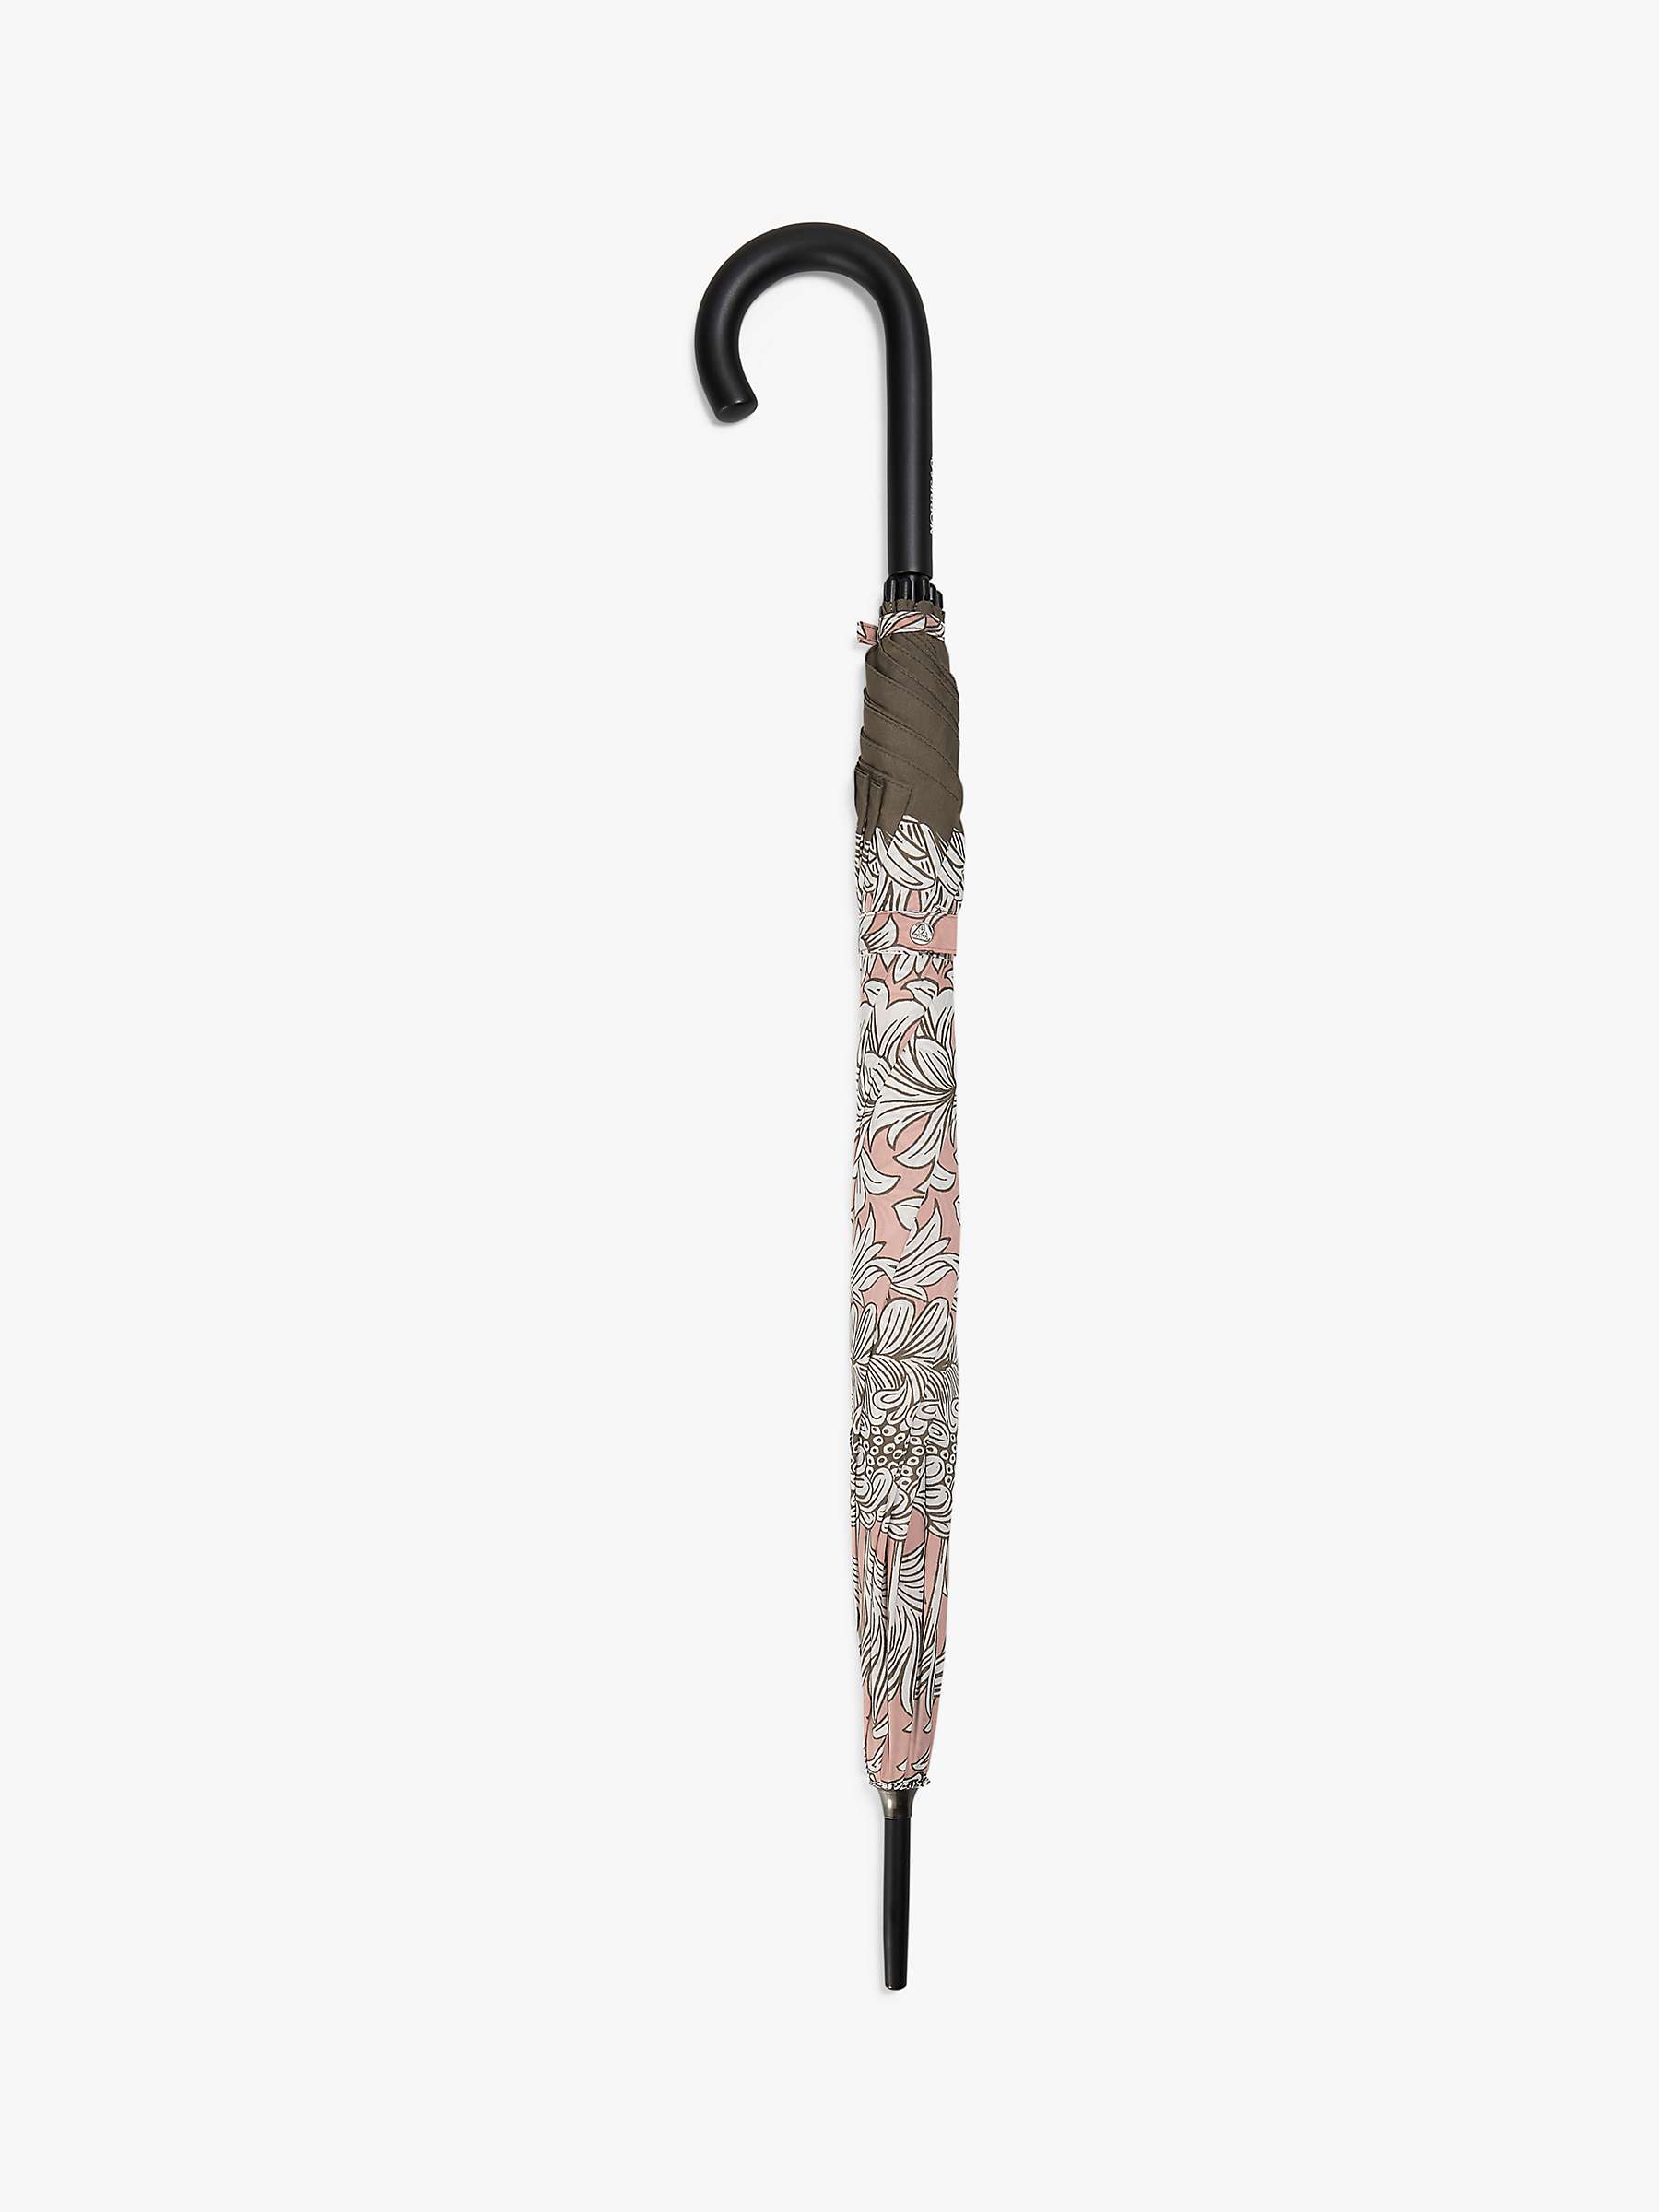 Buy Morris & Co. by Fulton Floral Large Walking Umbrella, Cochineal Pink Online at johnlewis.com